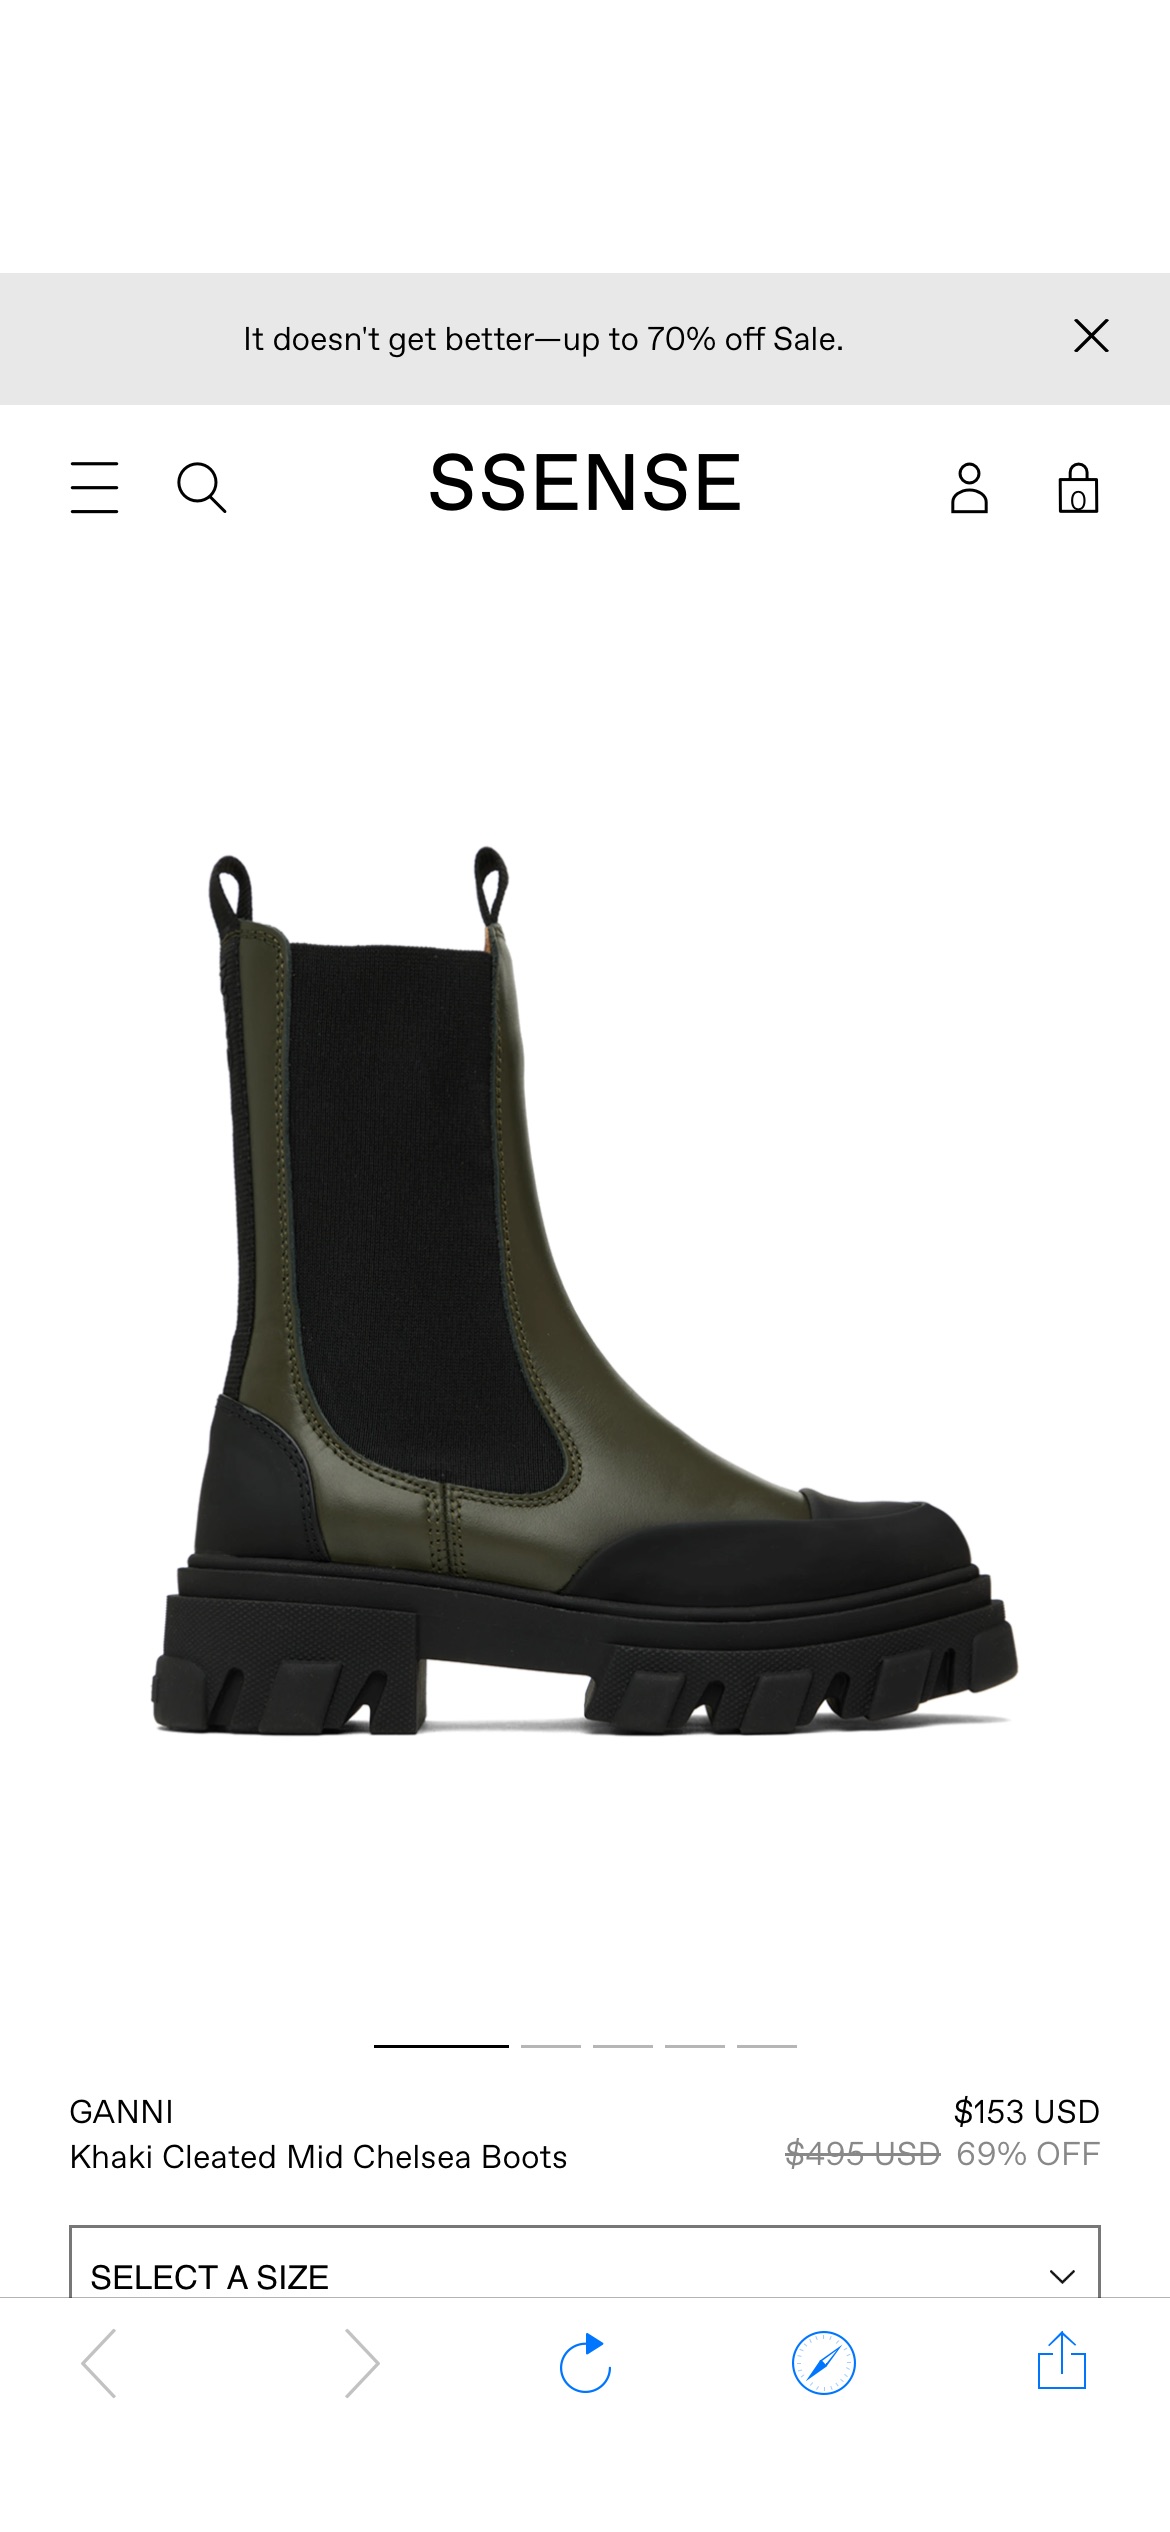 Khaki Cleated Mid Chelsea Boots by GANNI on Sale